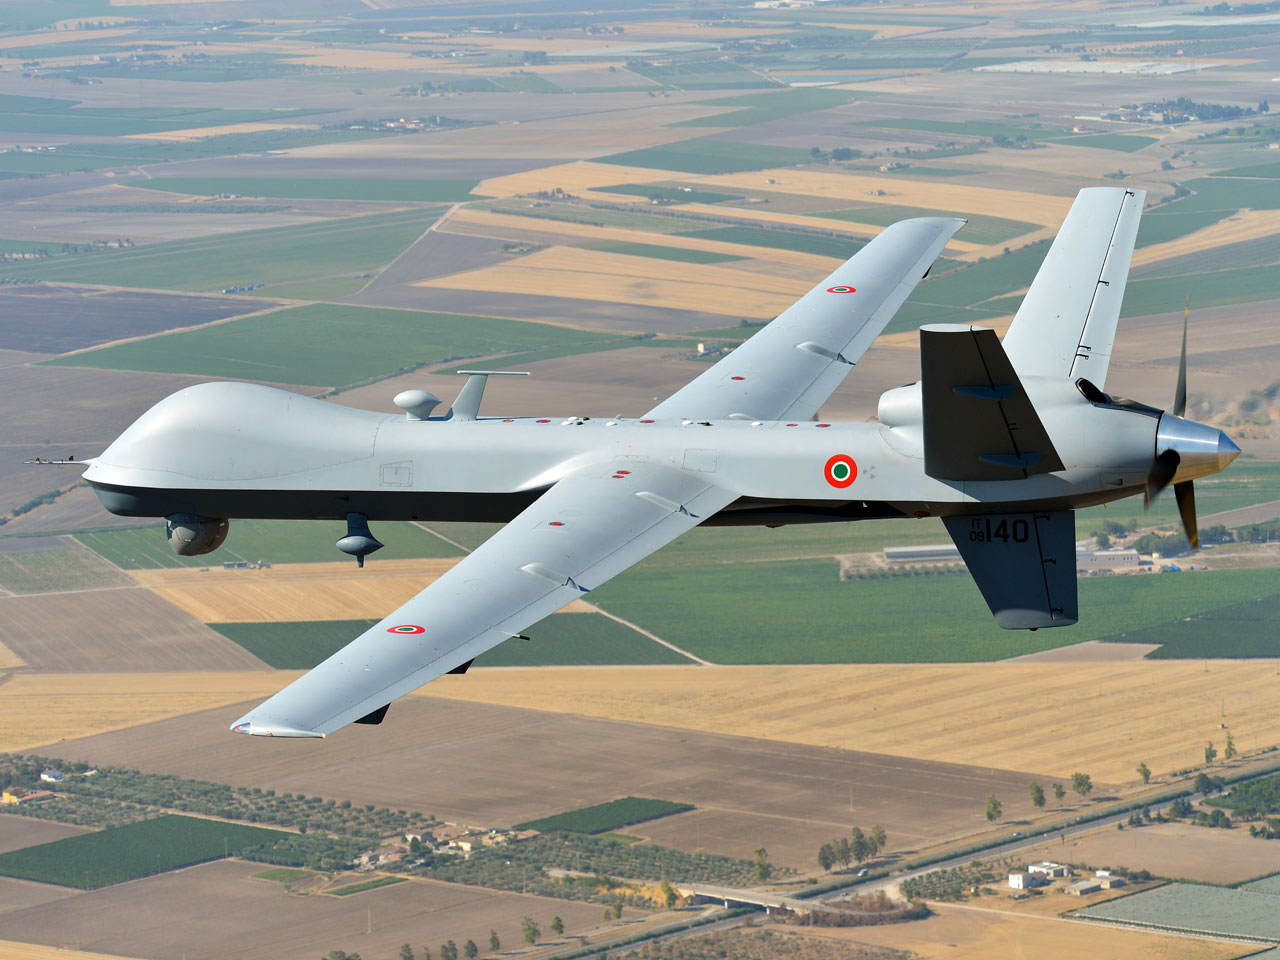 Italian Air Force MQ-9 Remotely Piloted Aircraft